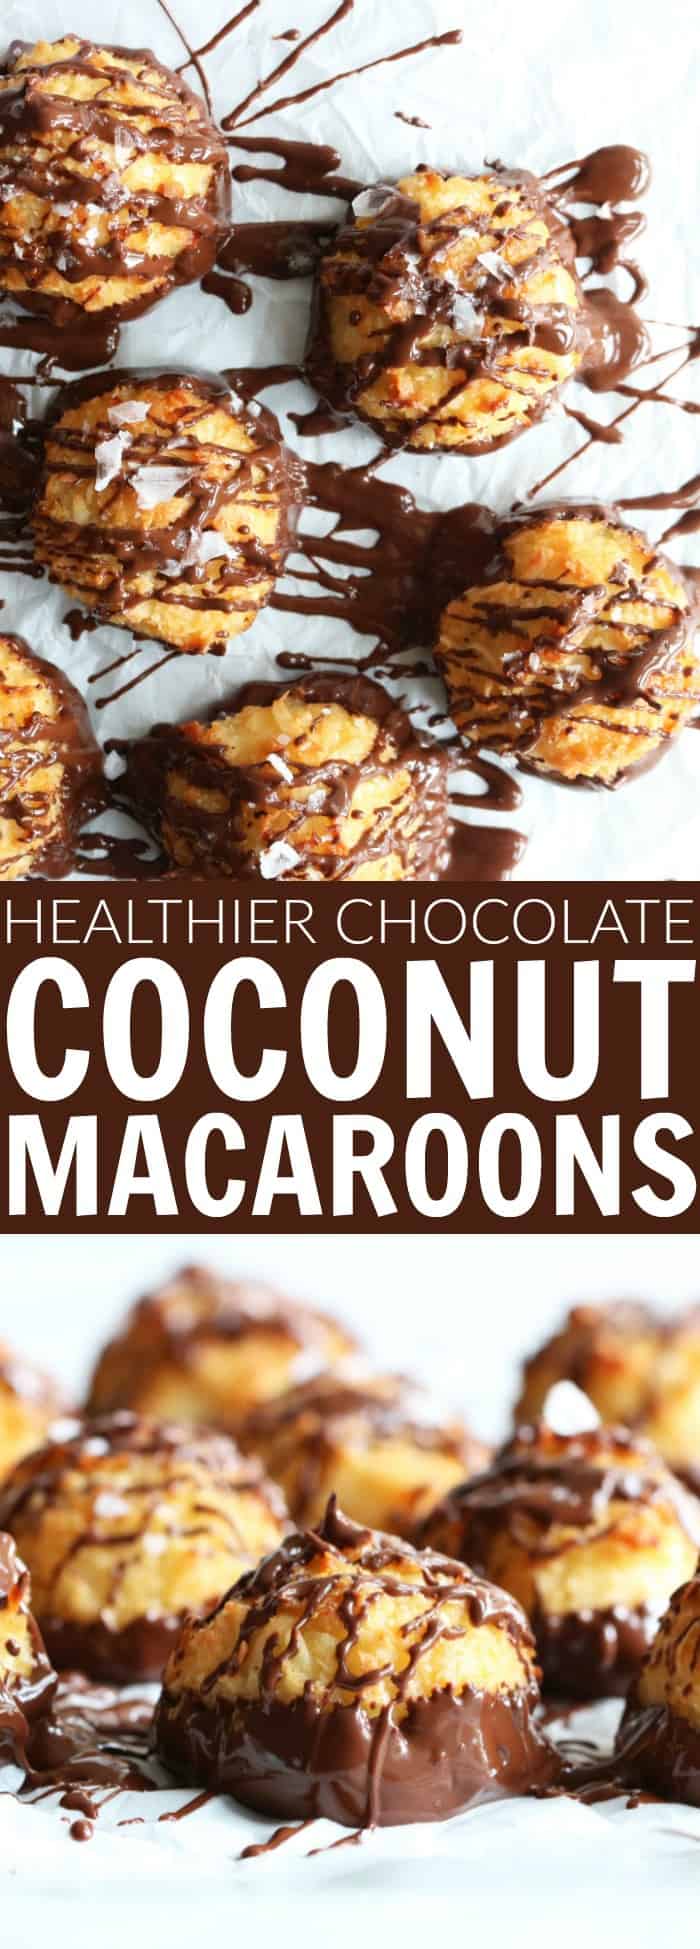 Chocolate Dipped Coconut Macaroons - The Toasted Pine Nut